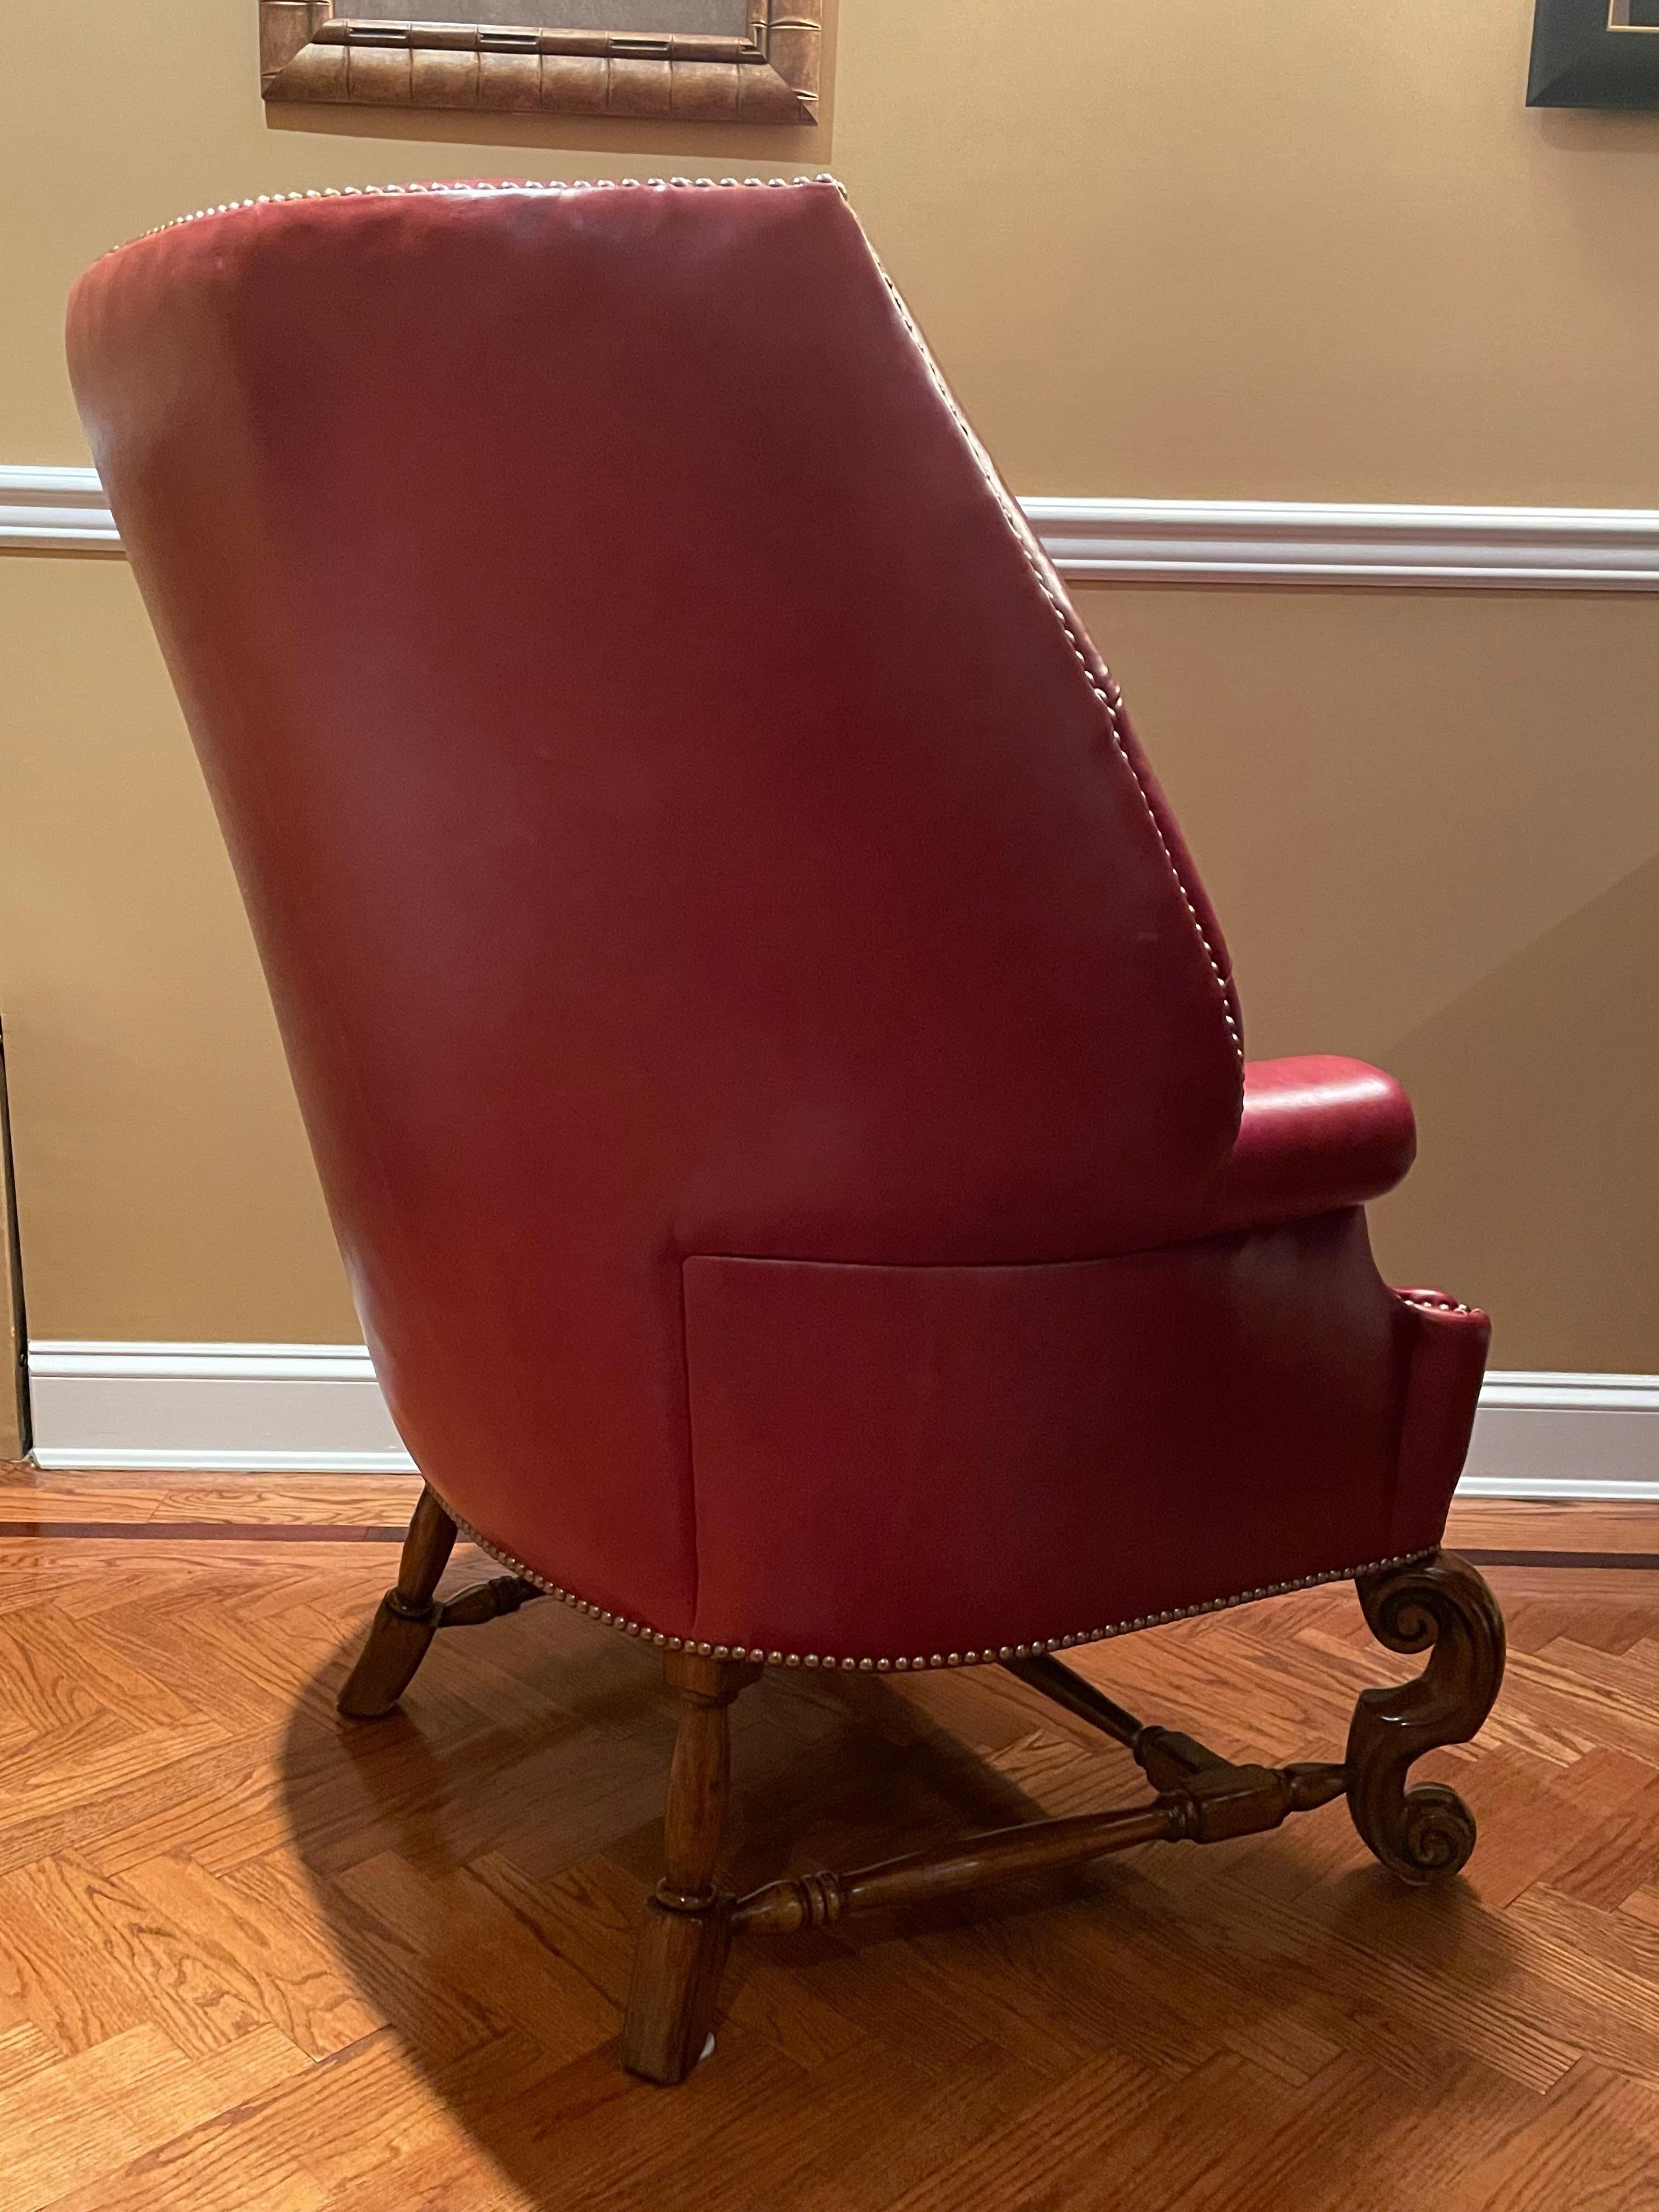 Pair of Oversized Tufted Leather Wingback Chairs, Georgian, Finest Quality In Good Condition For Sale In Stamford, CT